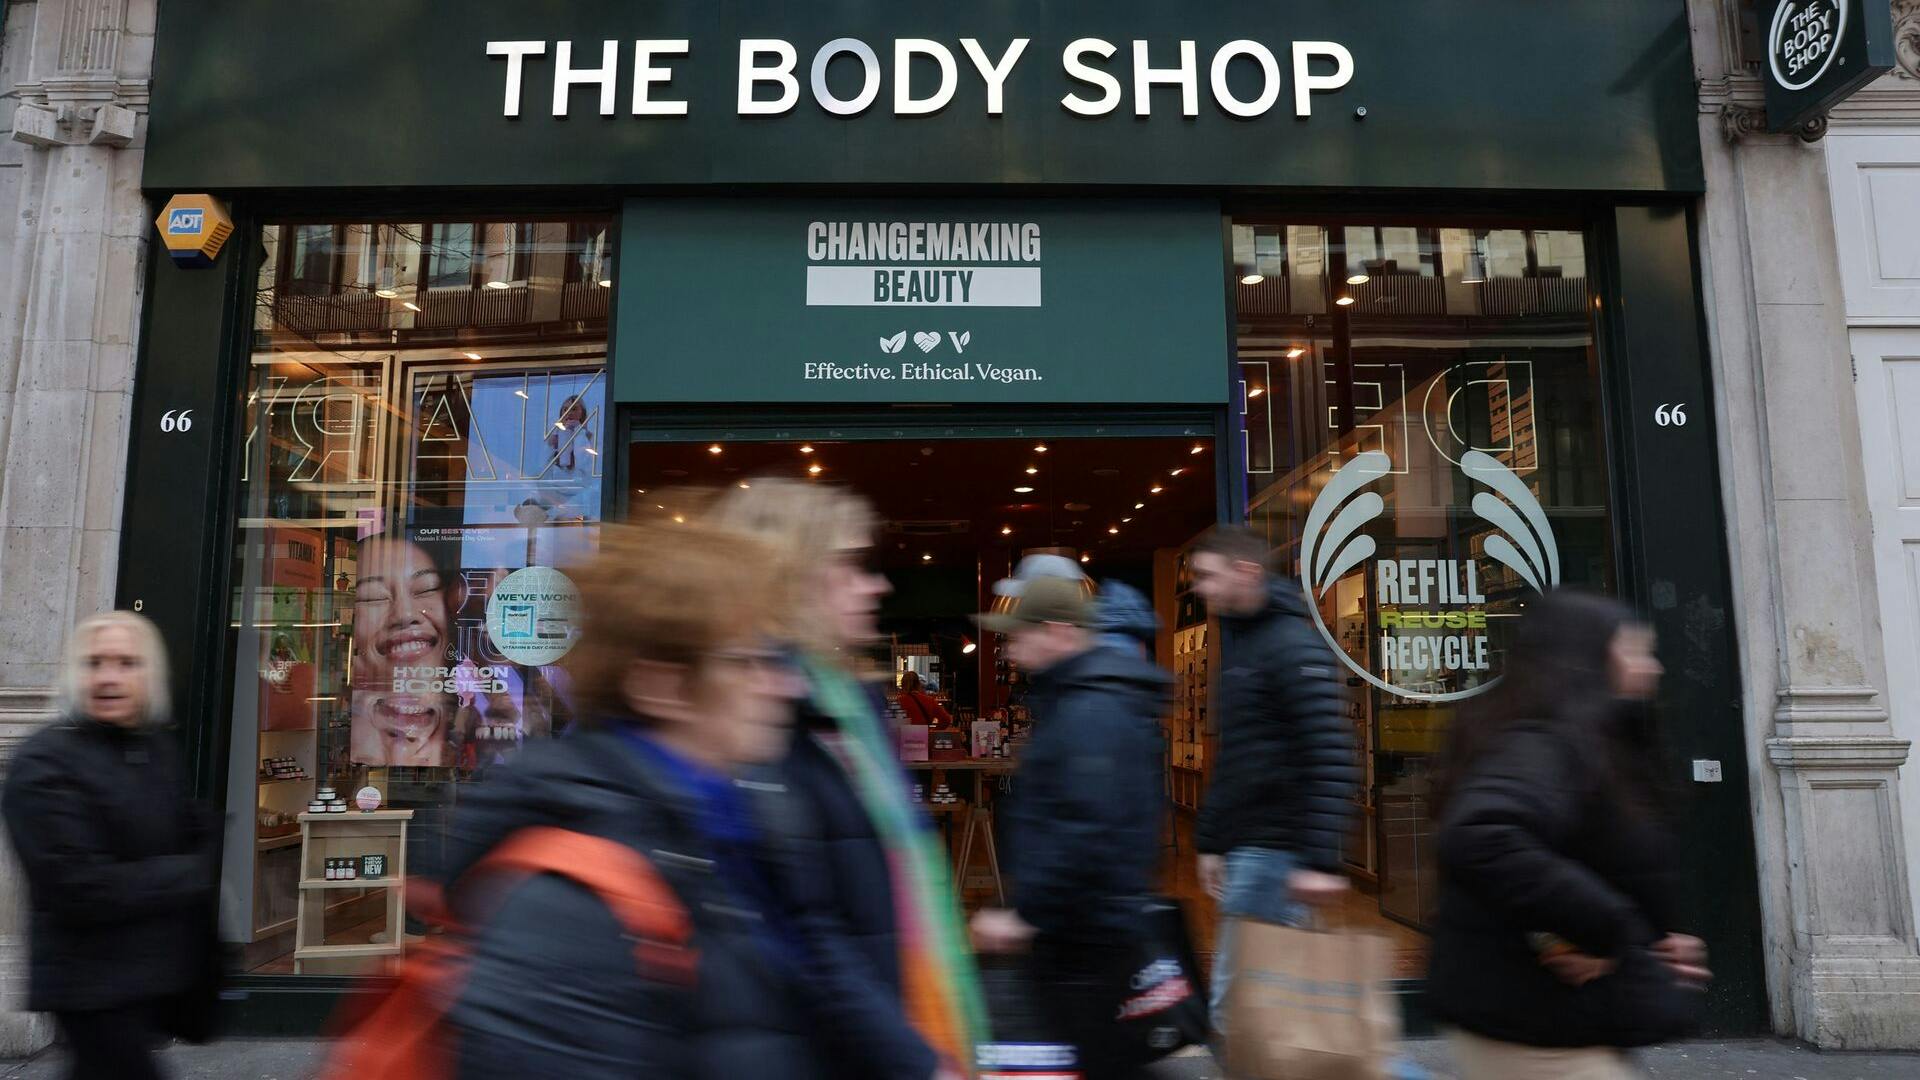 Pedestrians walk bas a branch of The Body Shop in central London on February 12, 2024. The Body Shop, the near 50-year-old cosmetics company renowned for its ethical hair and skin products, is near bankrupt in the UK after poor Christmas trade, according to reports in British media. (Photo by Daniel LEAL / AFP)